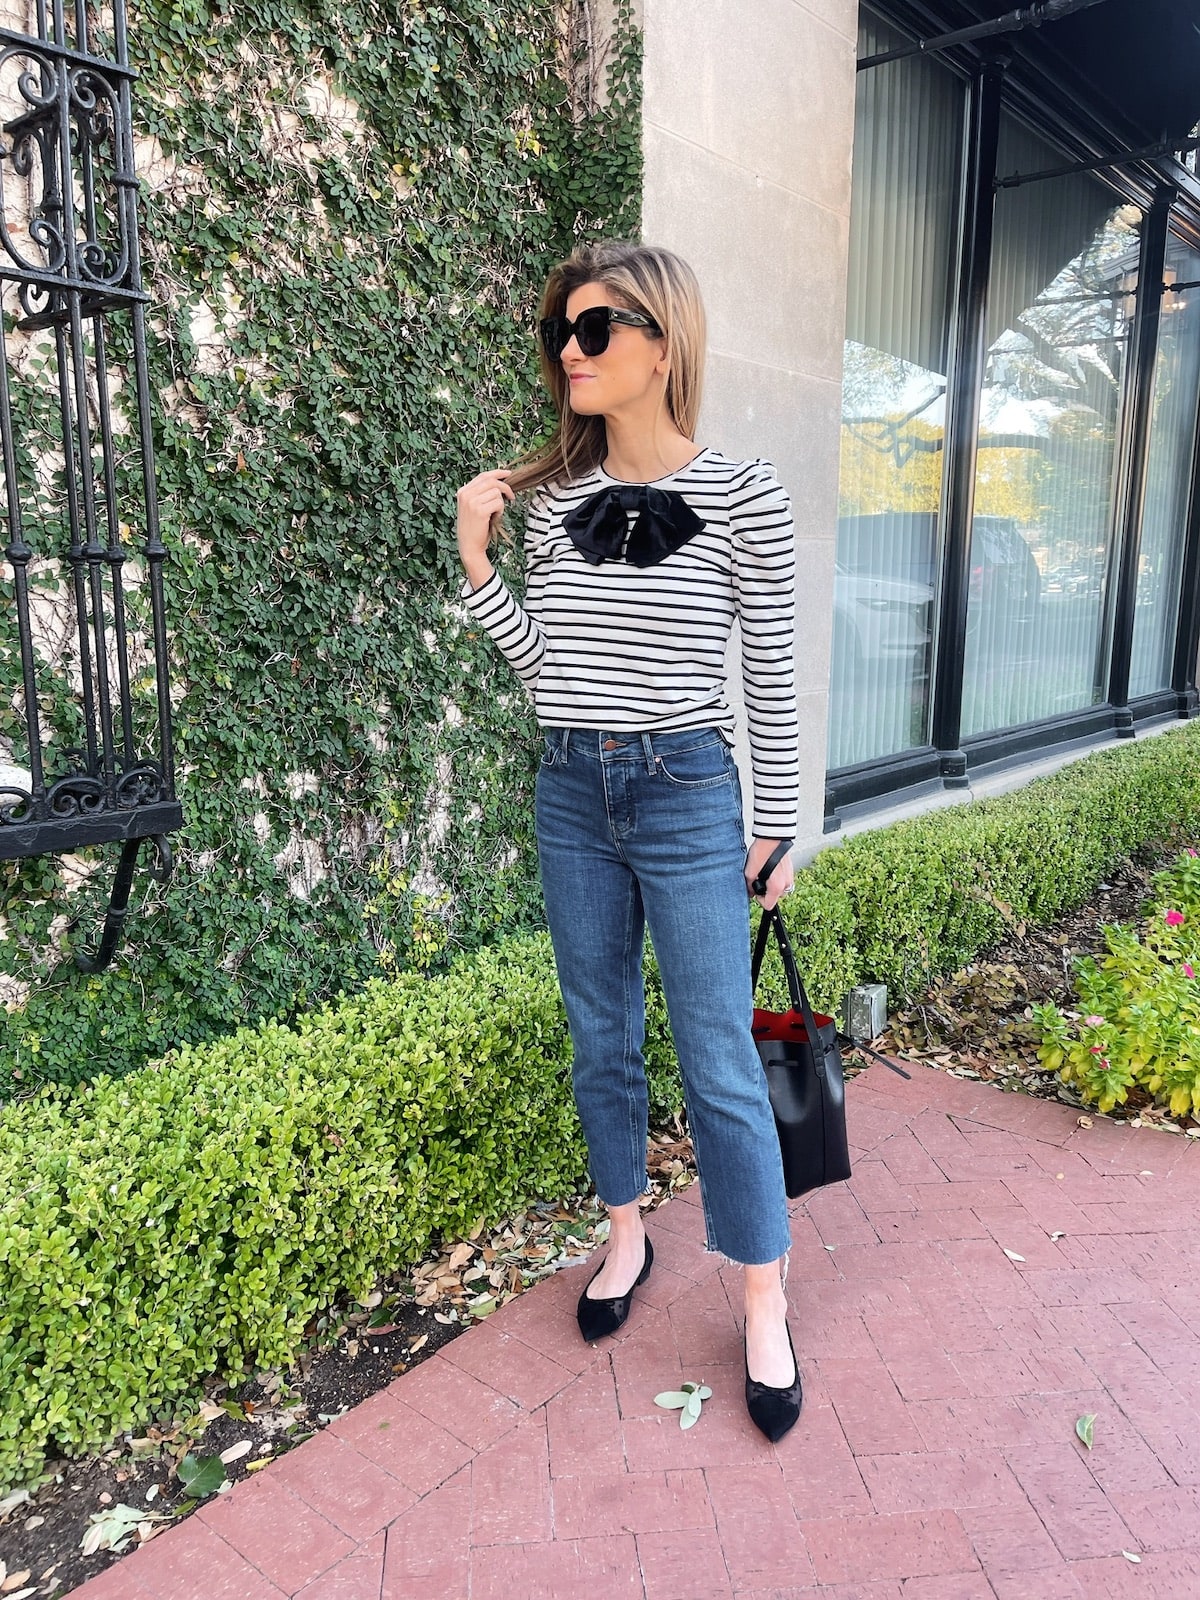 Brighton Butler wearing Boden striped top and jeans with black flats